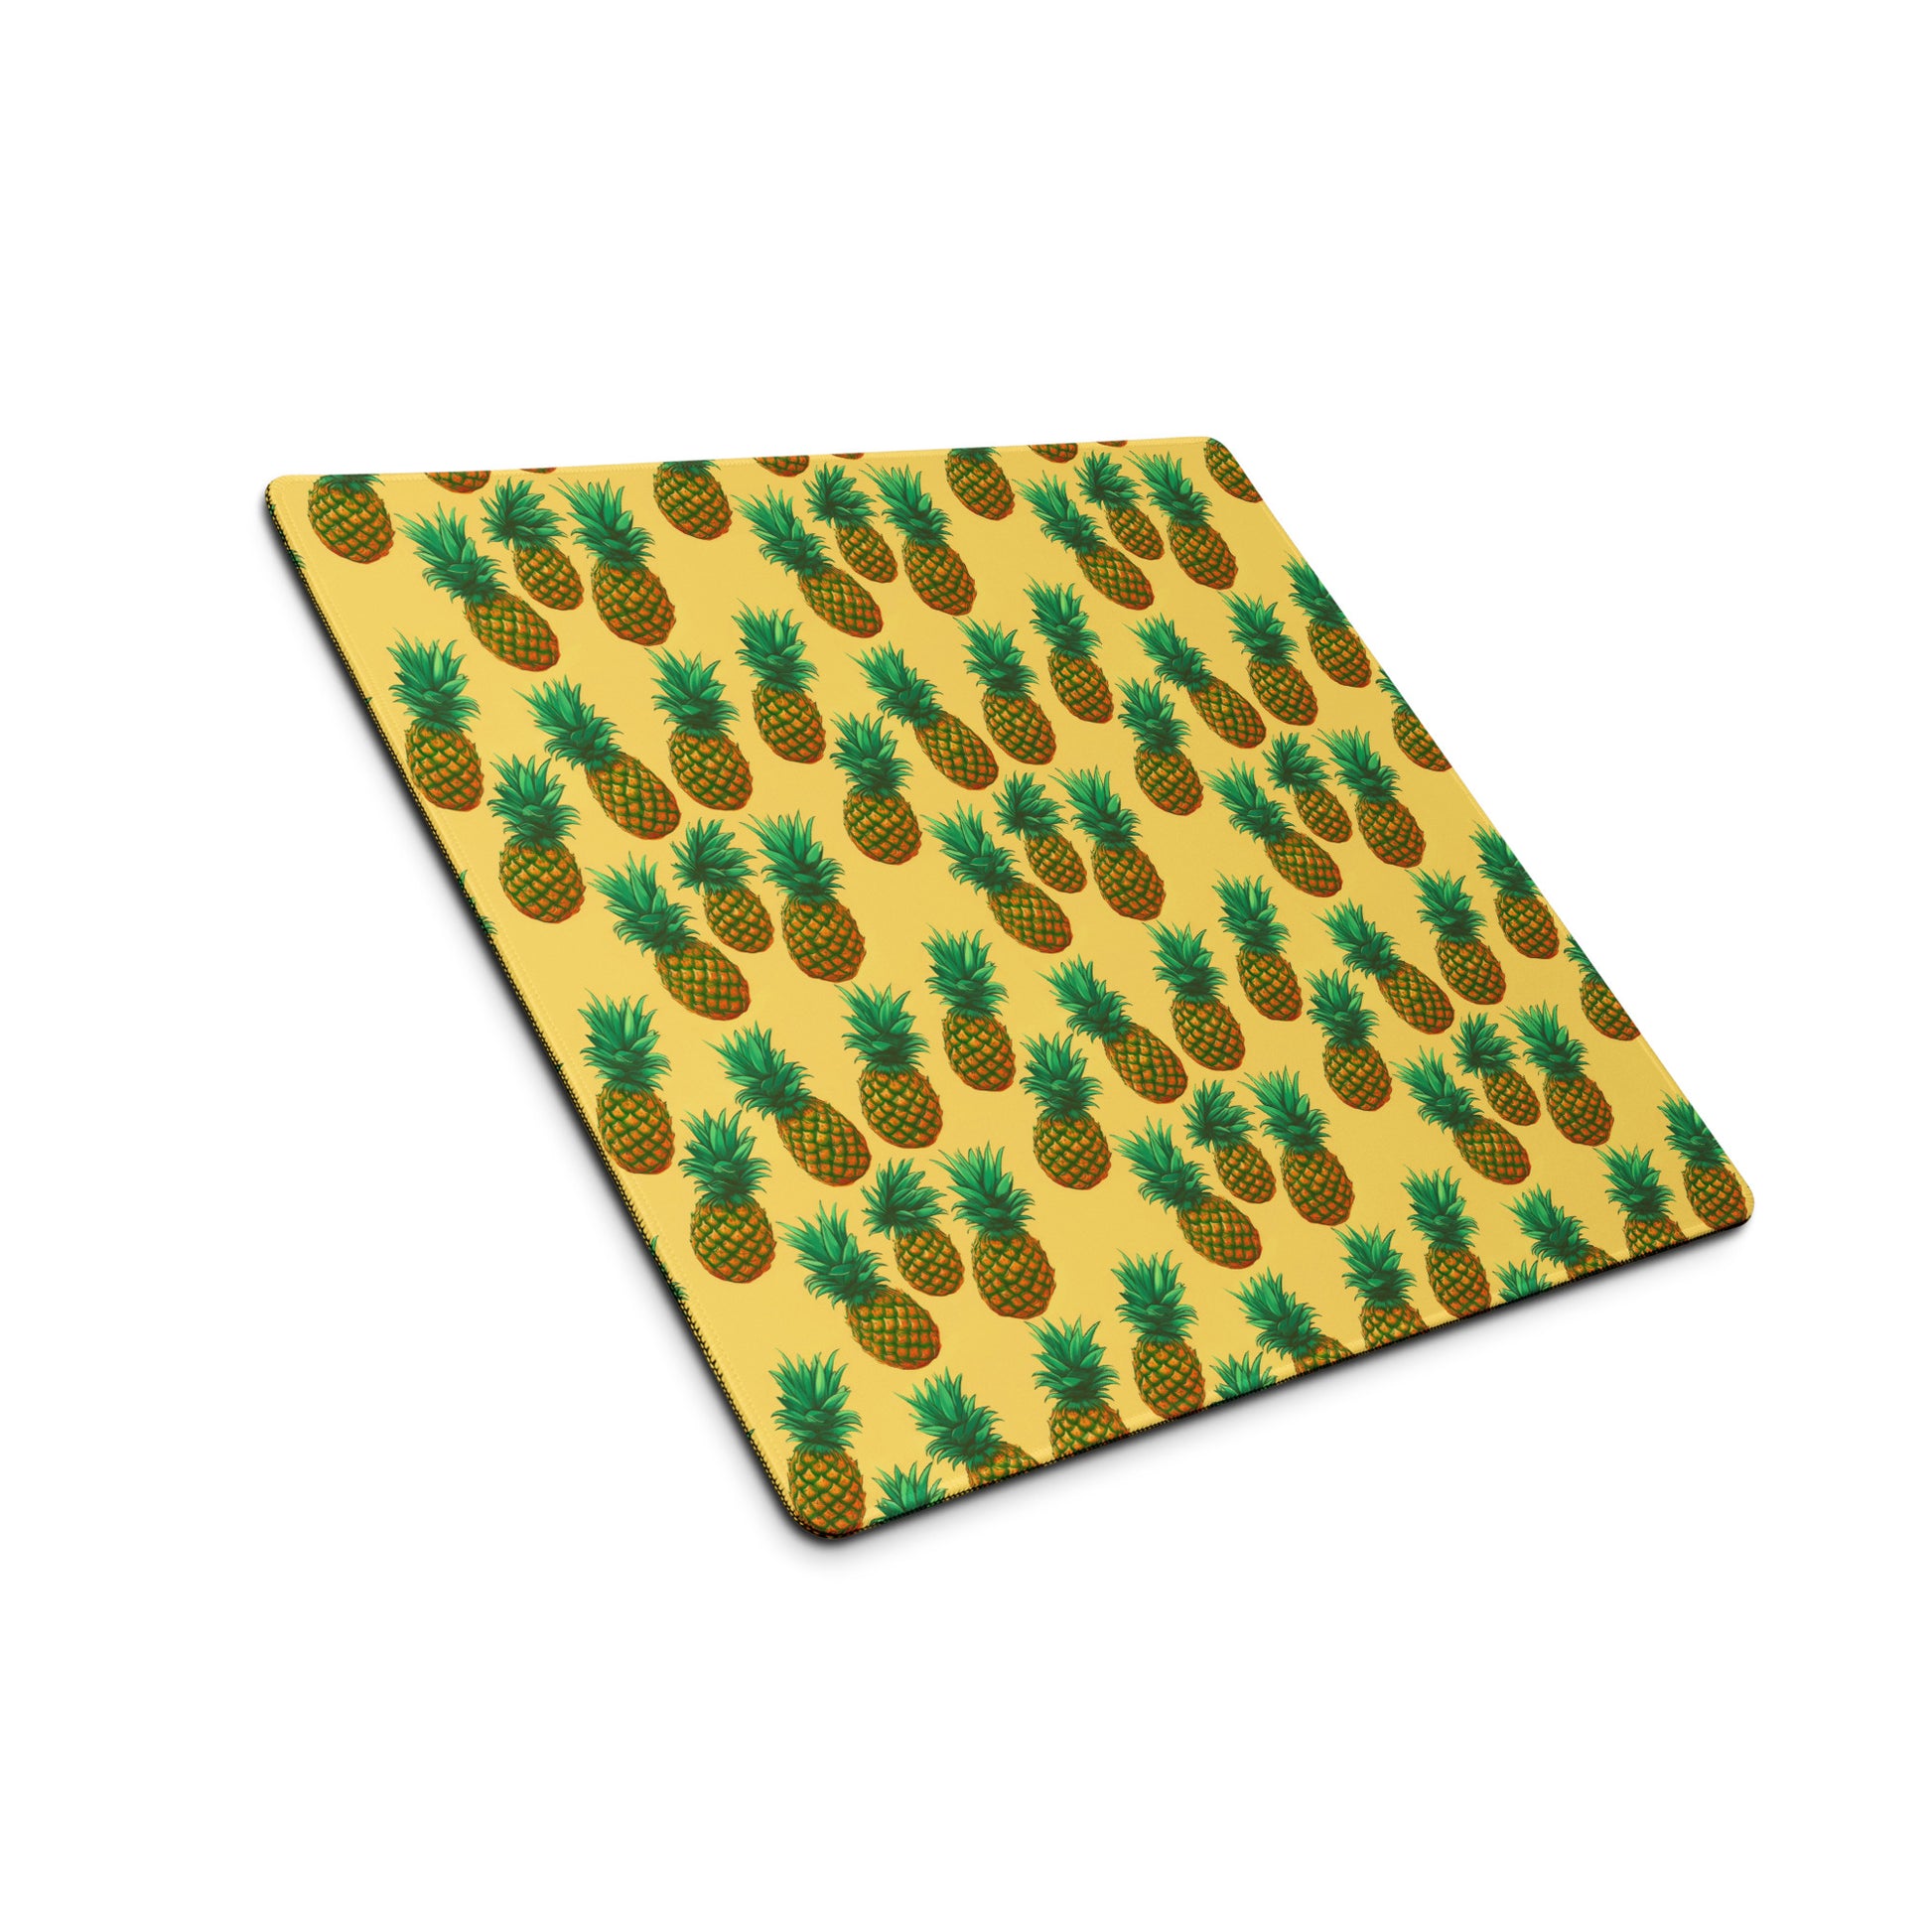 A 18" x 16" desk pad with pineapples all over it shown at an angle. Yellow in color.